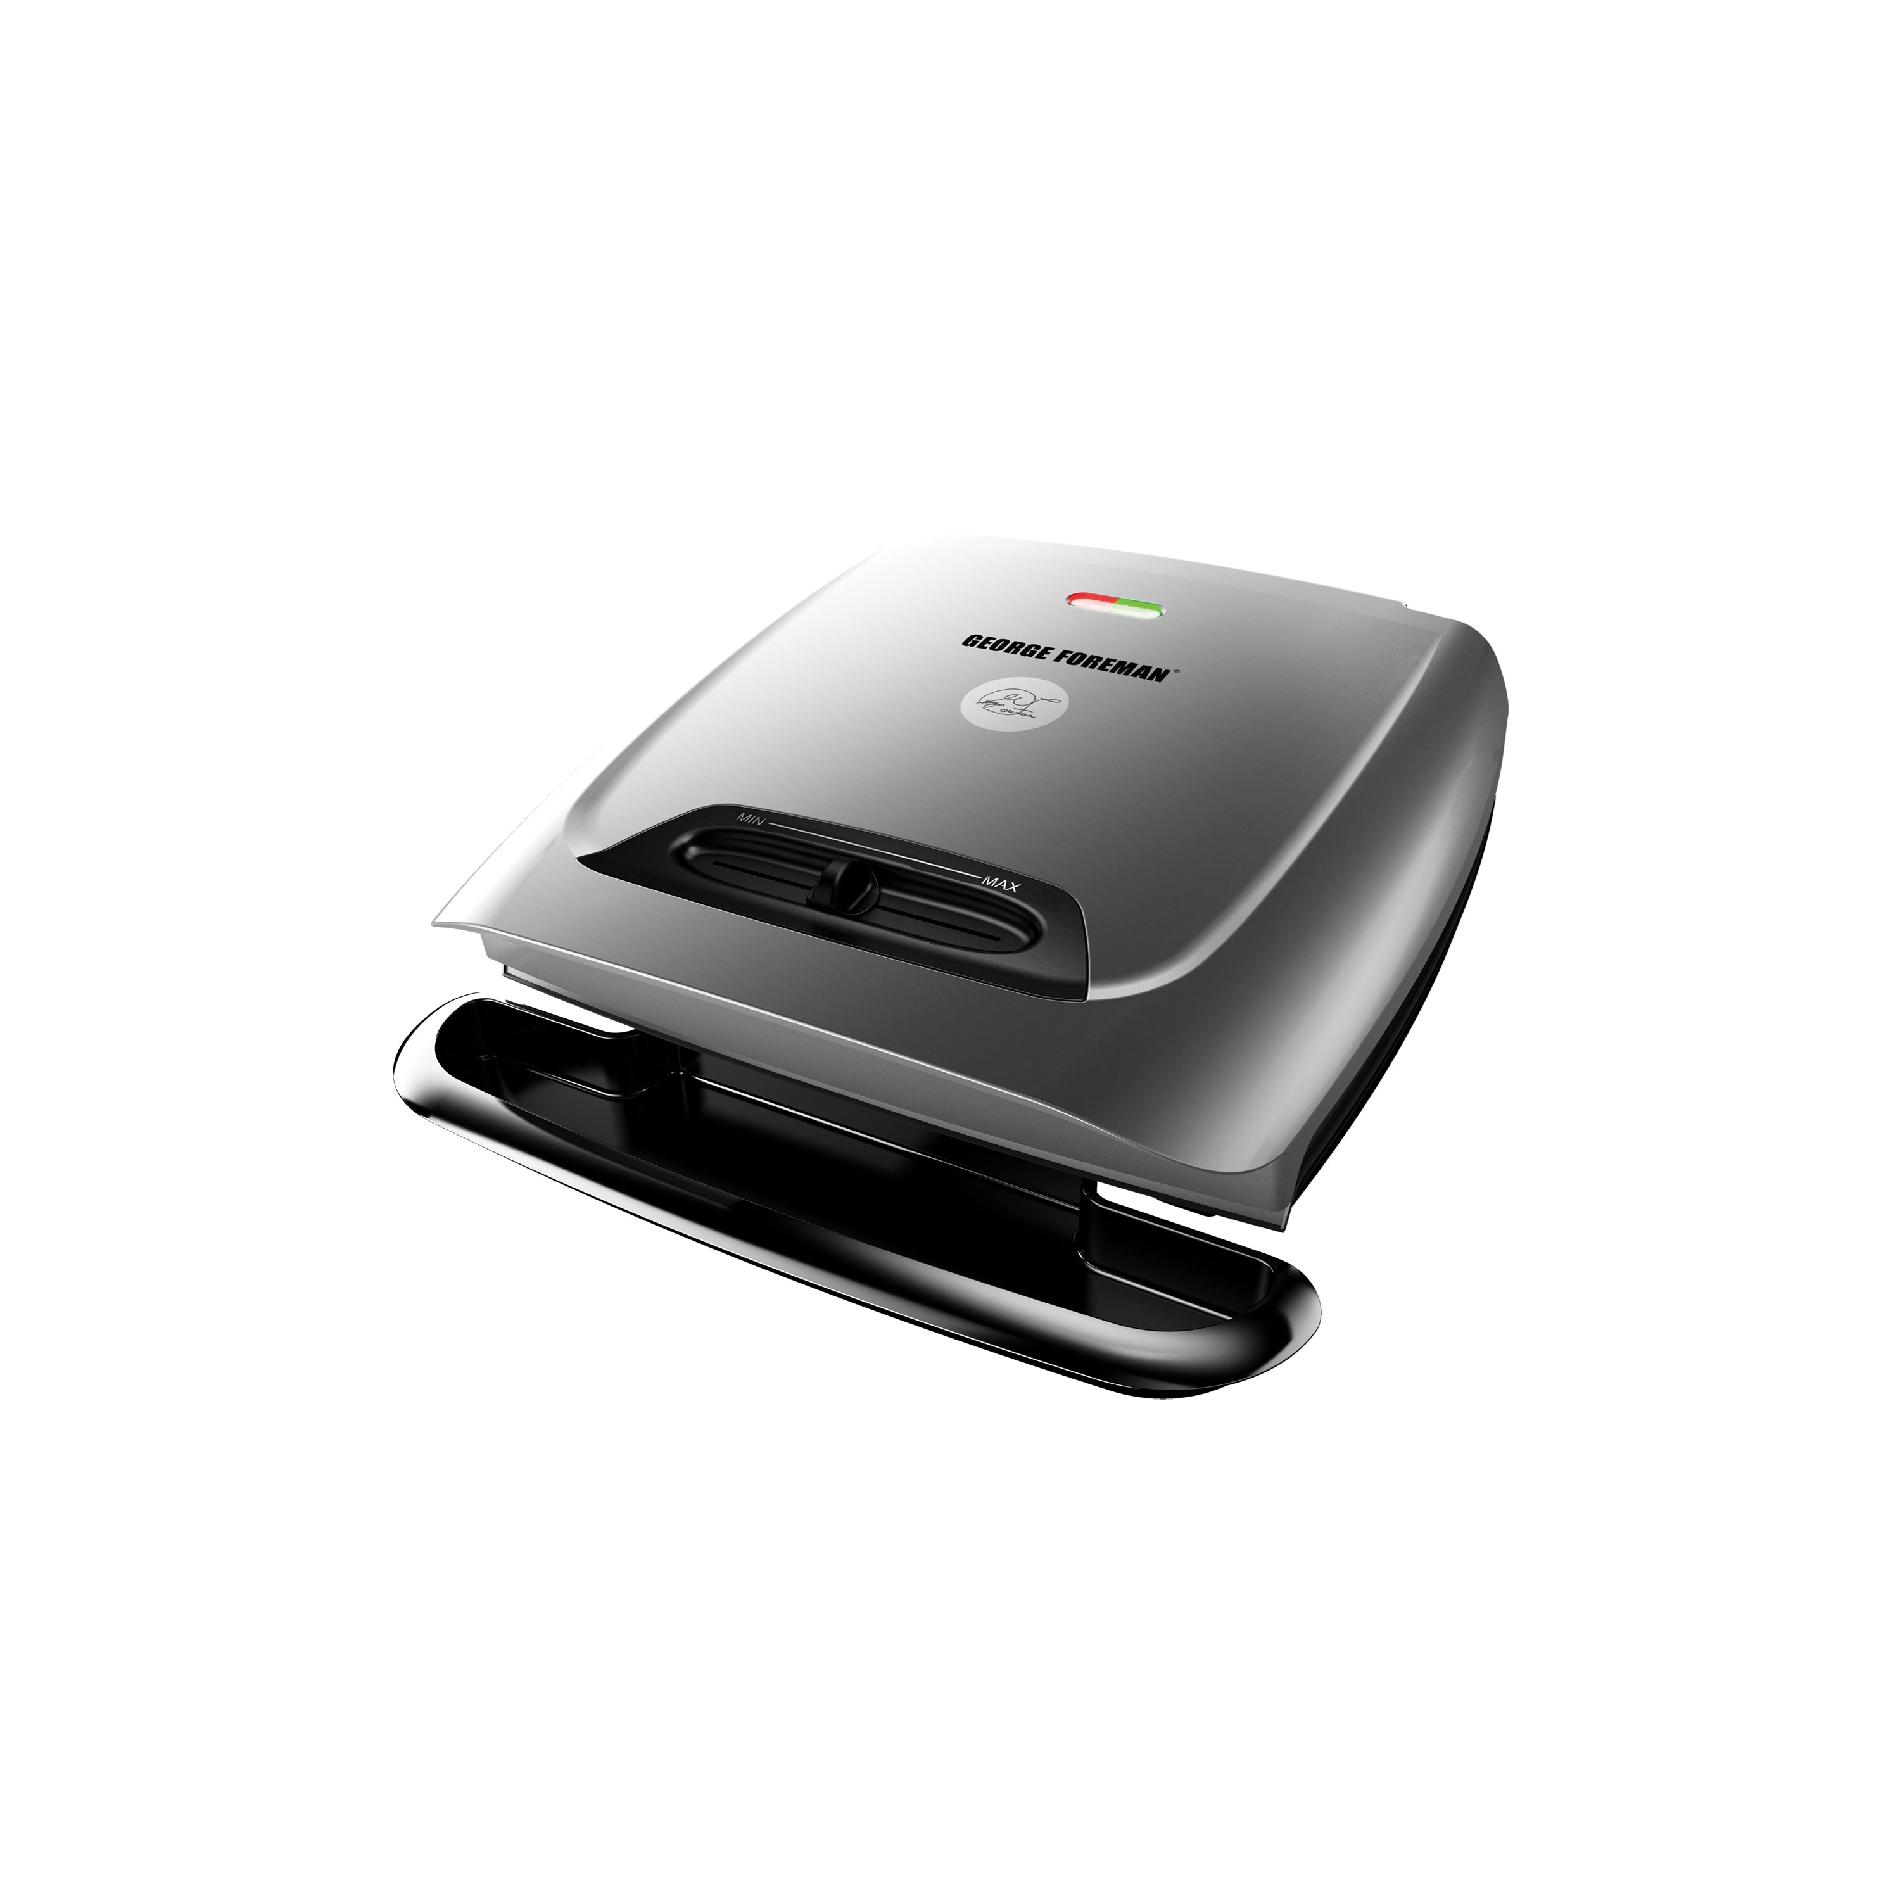 George Foreman Classic Electric Grill for 8